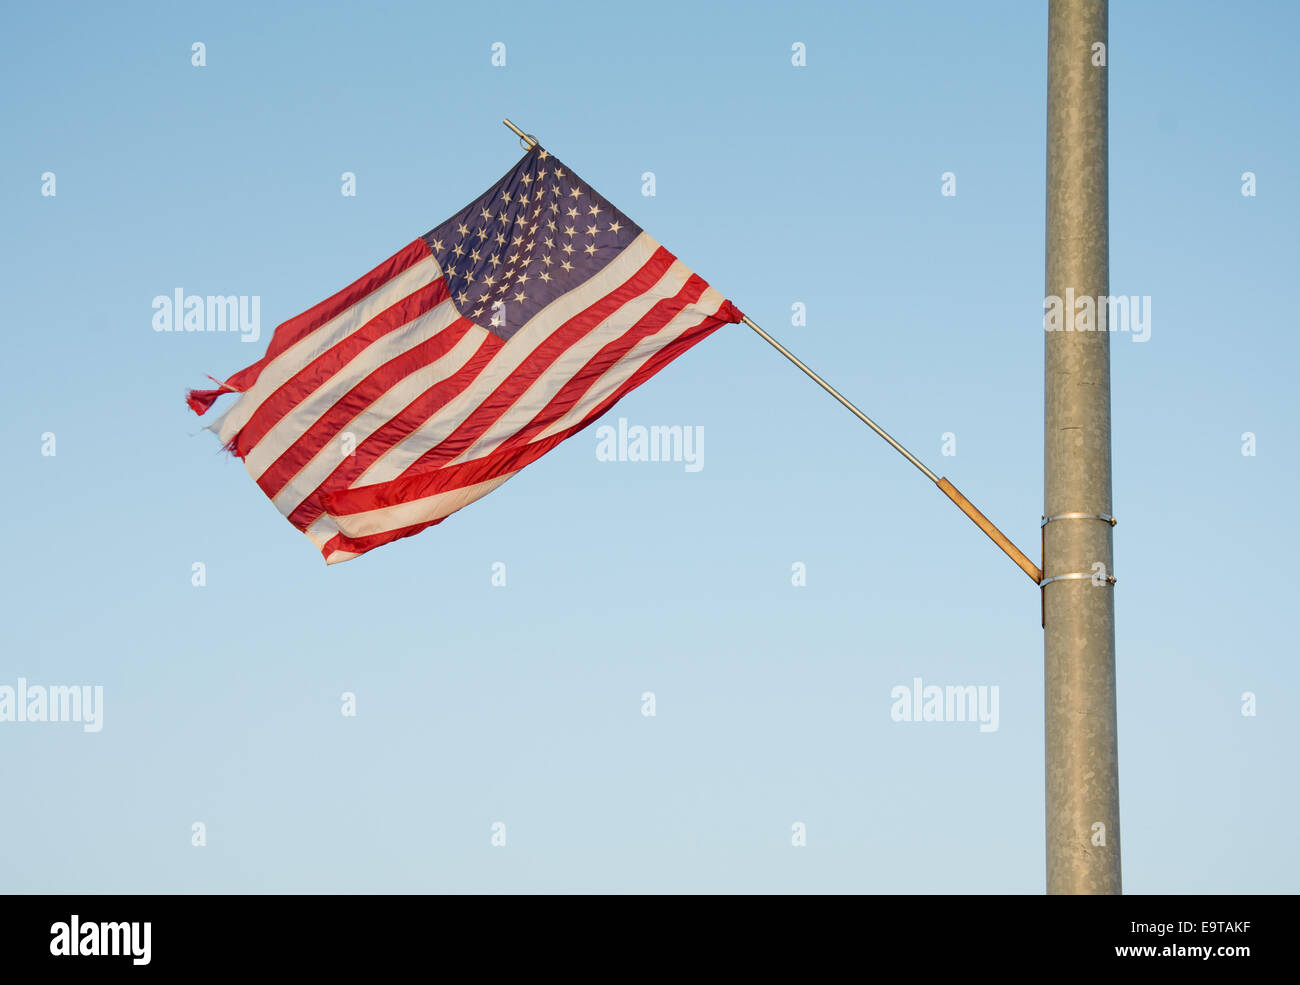 US flag attached to a street light in a small rural town, waving in evening sun Stock Photo